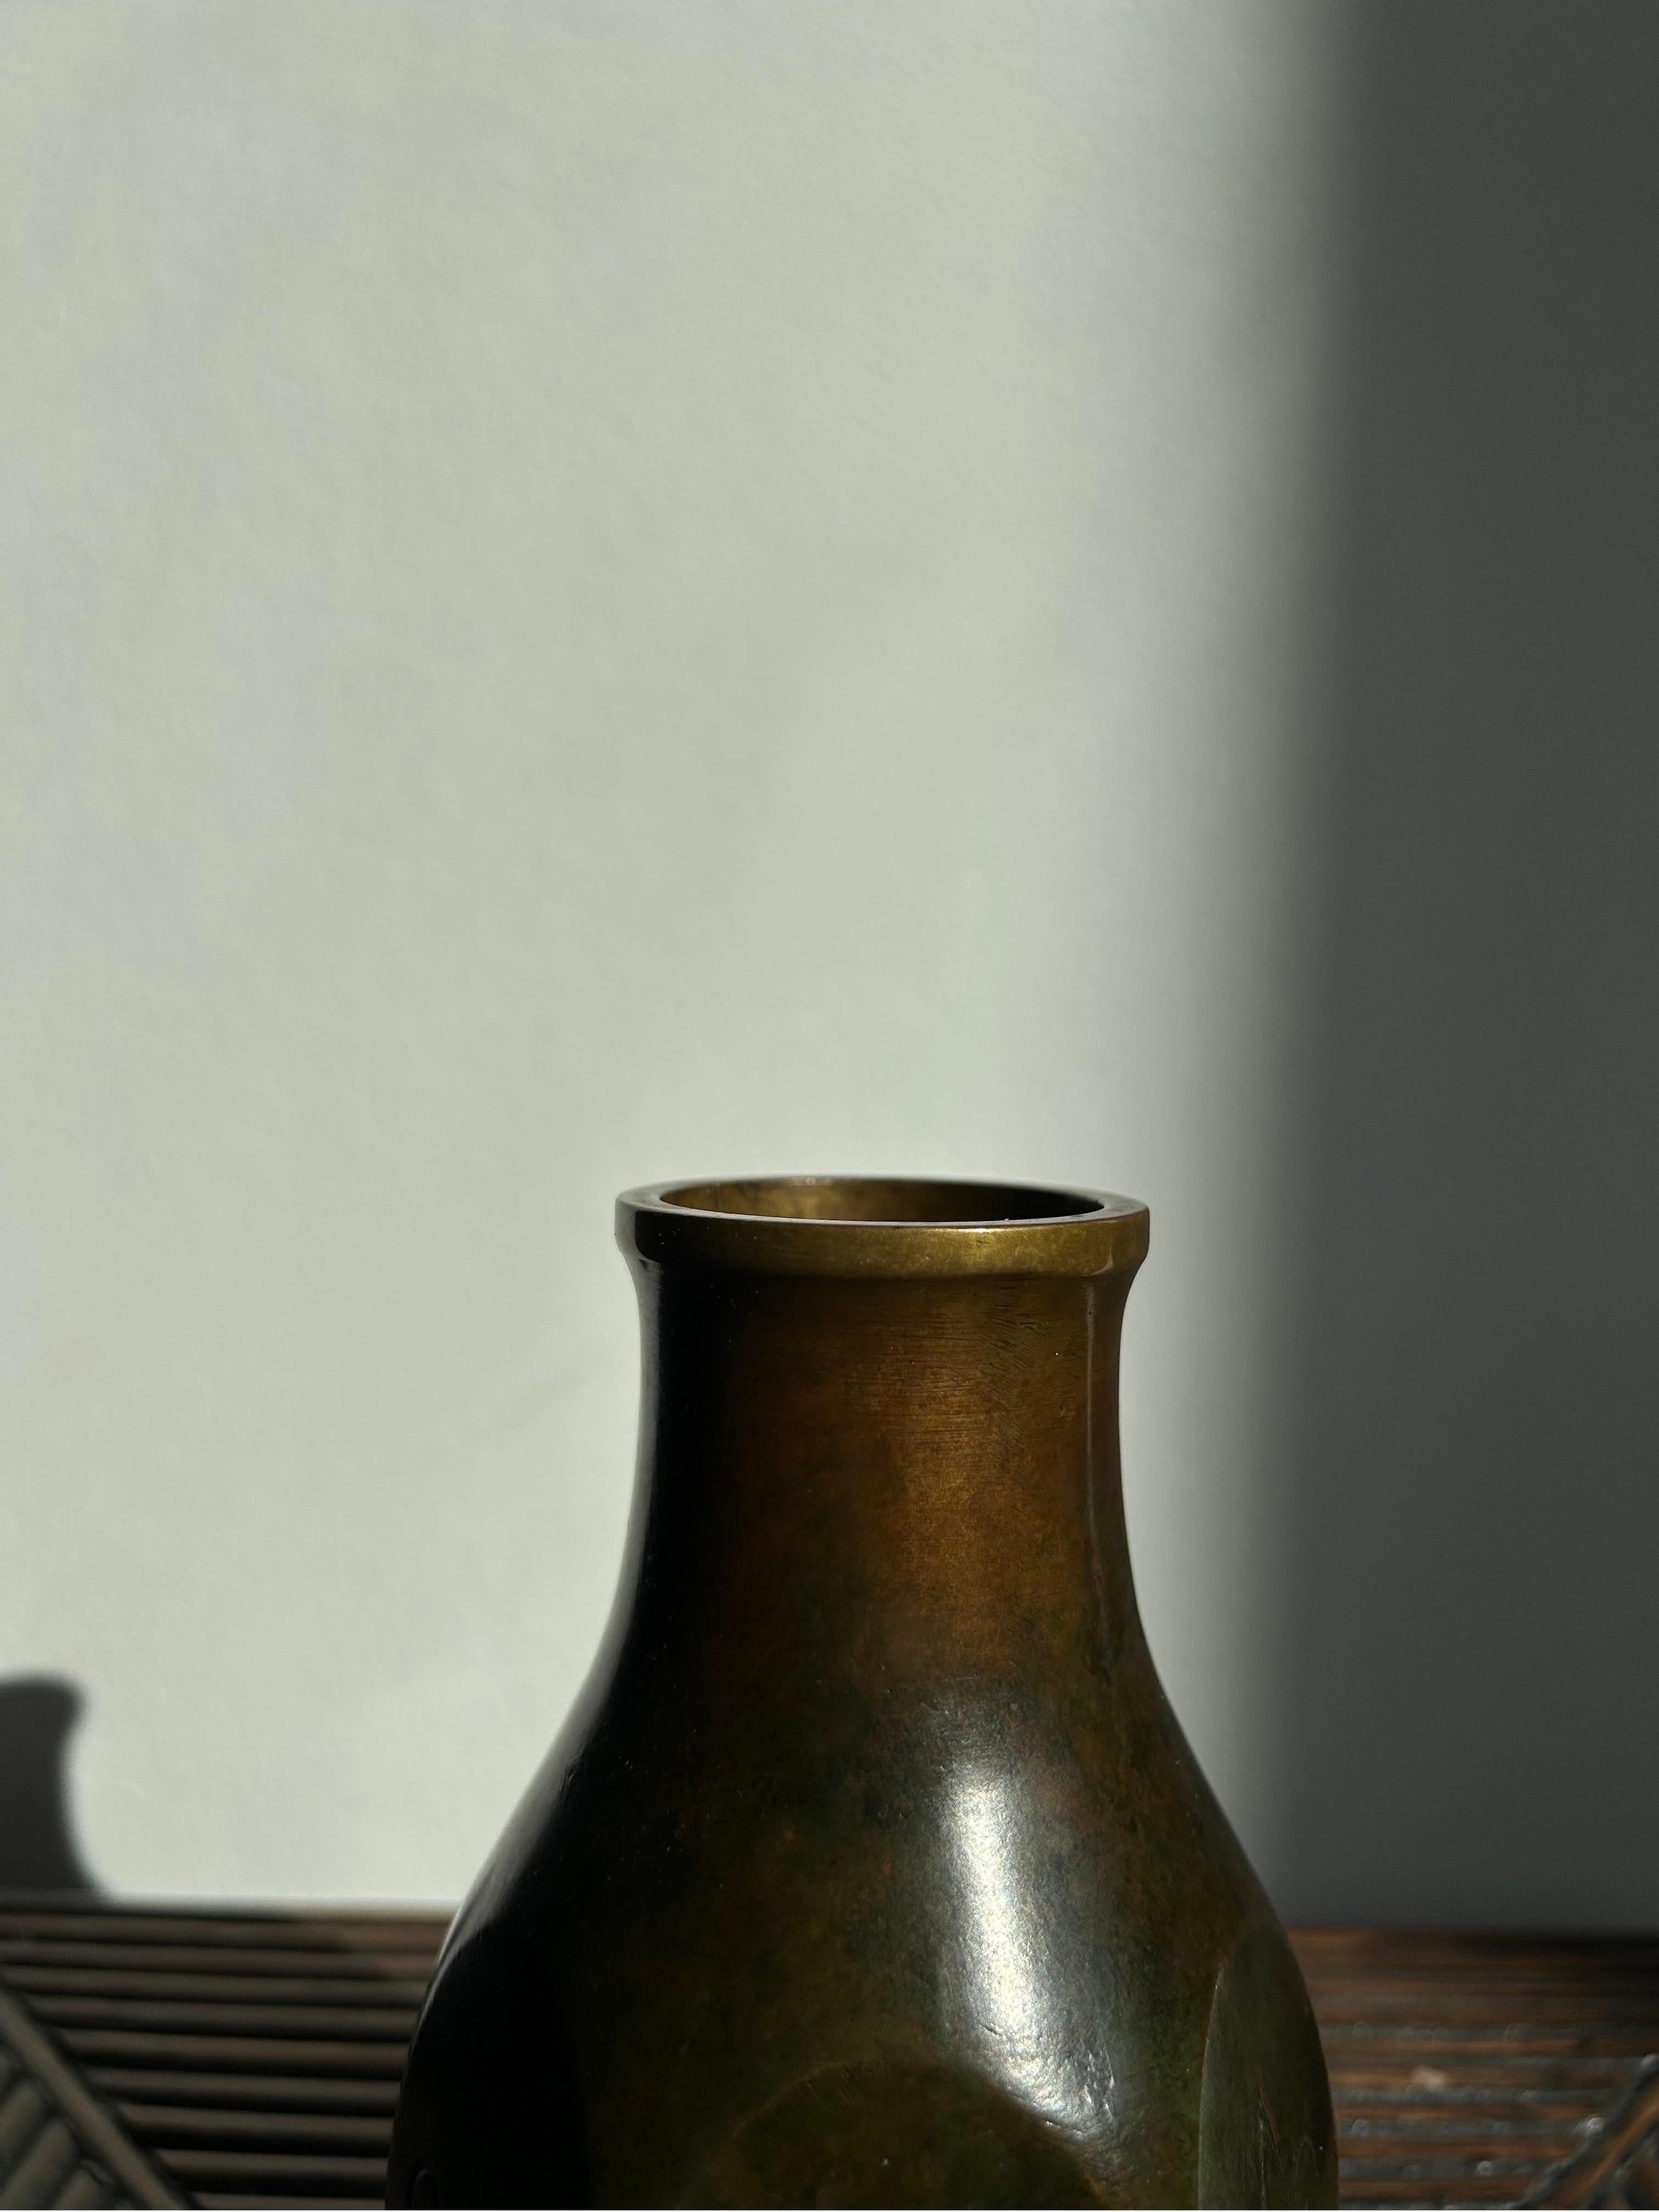 Rare Tinos bronze Art Deco vase made in Denmark in the 1930s.


Art Deco, short for the French Arts Décoratifs, and sometimes just called Deco, is a style of visual arts, architecture, and product design, that first appeared in France in the